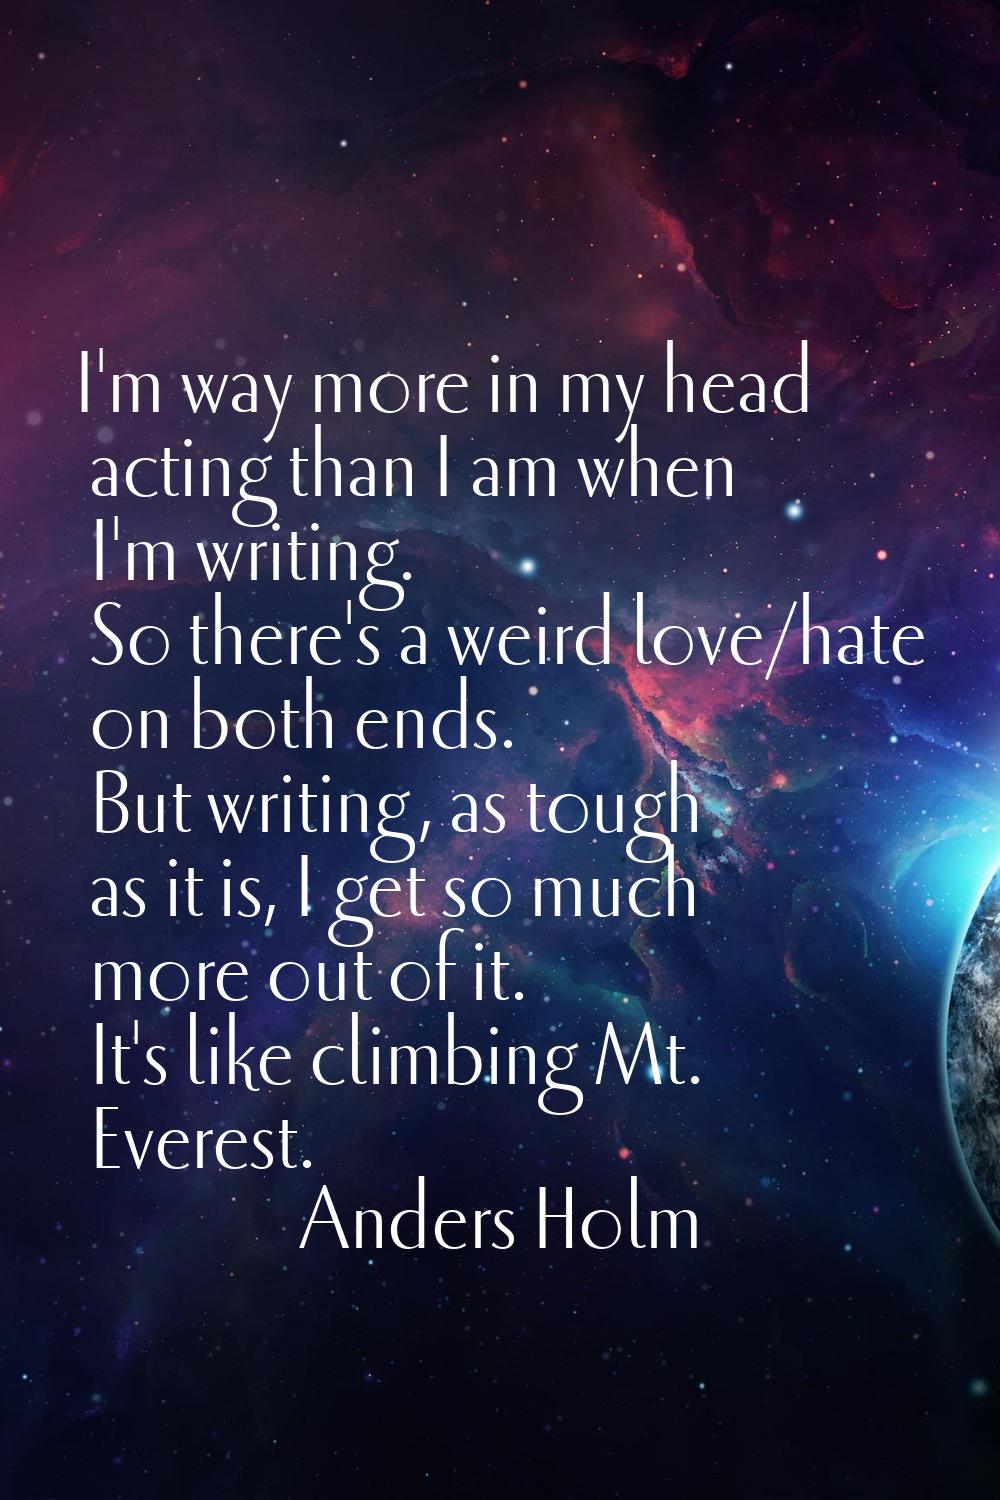 I'm way more in my head acting than I am when I'm writing. So there's a weird love/hate on both end